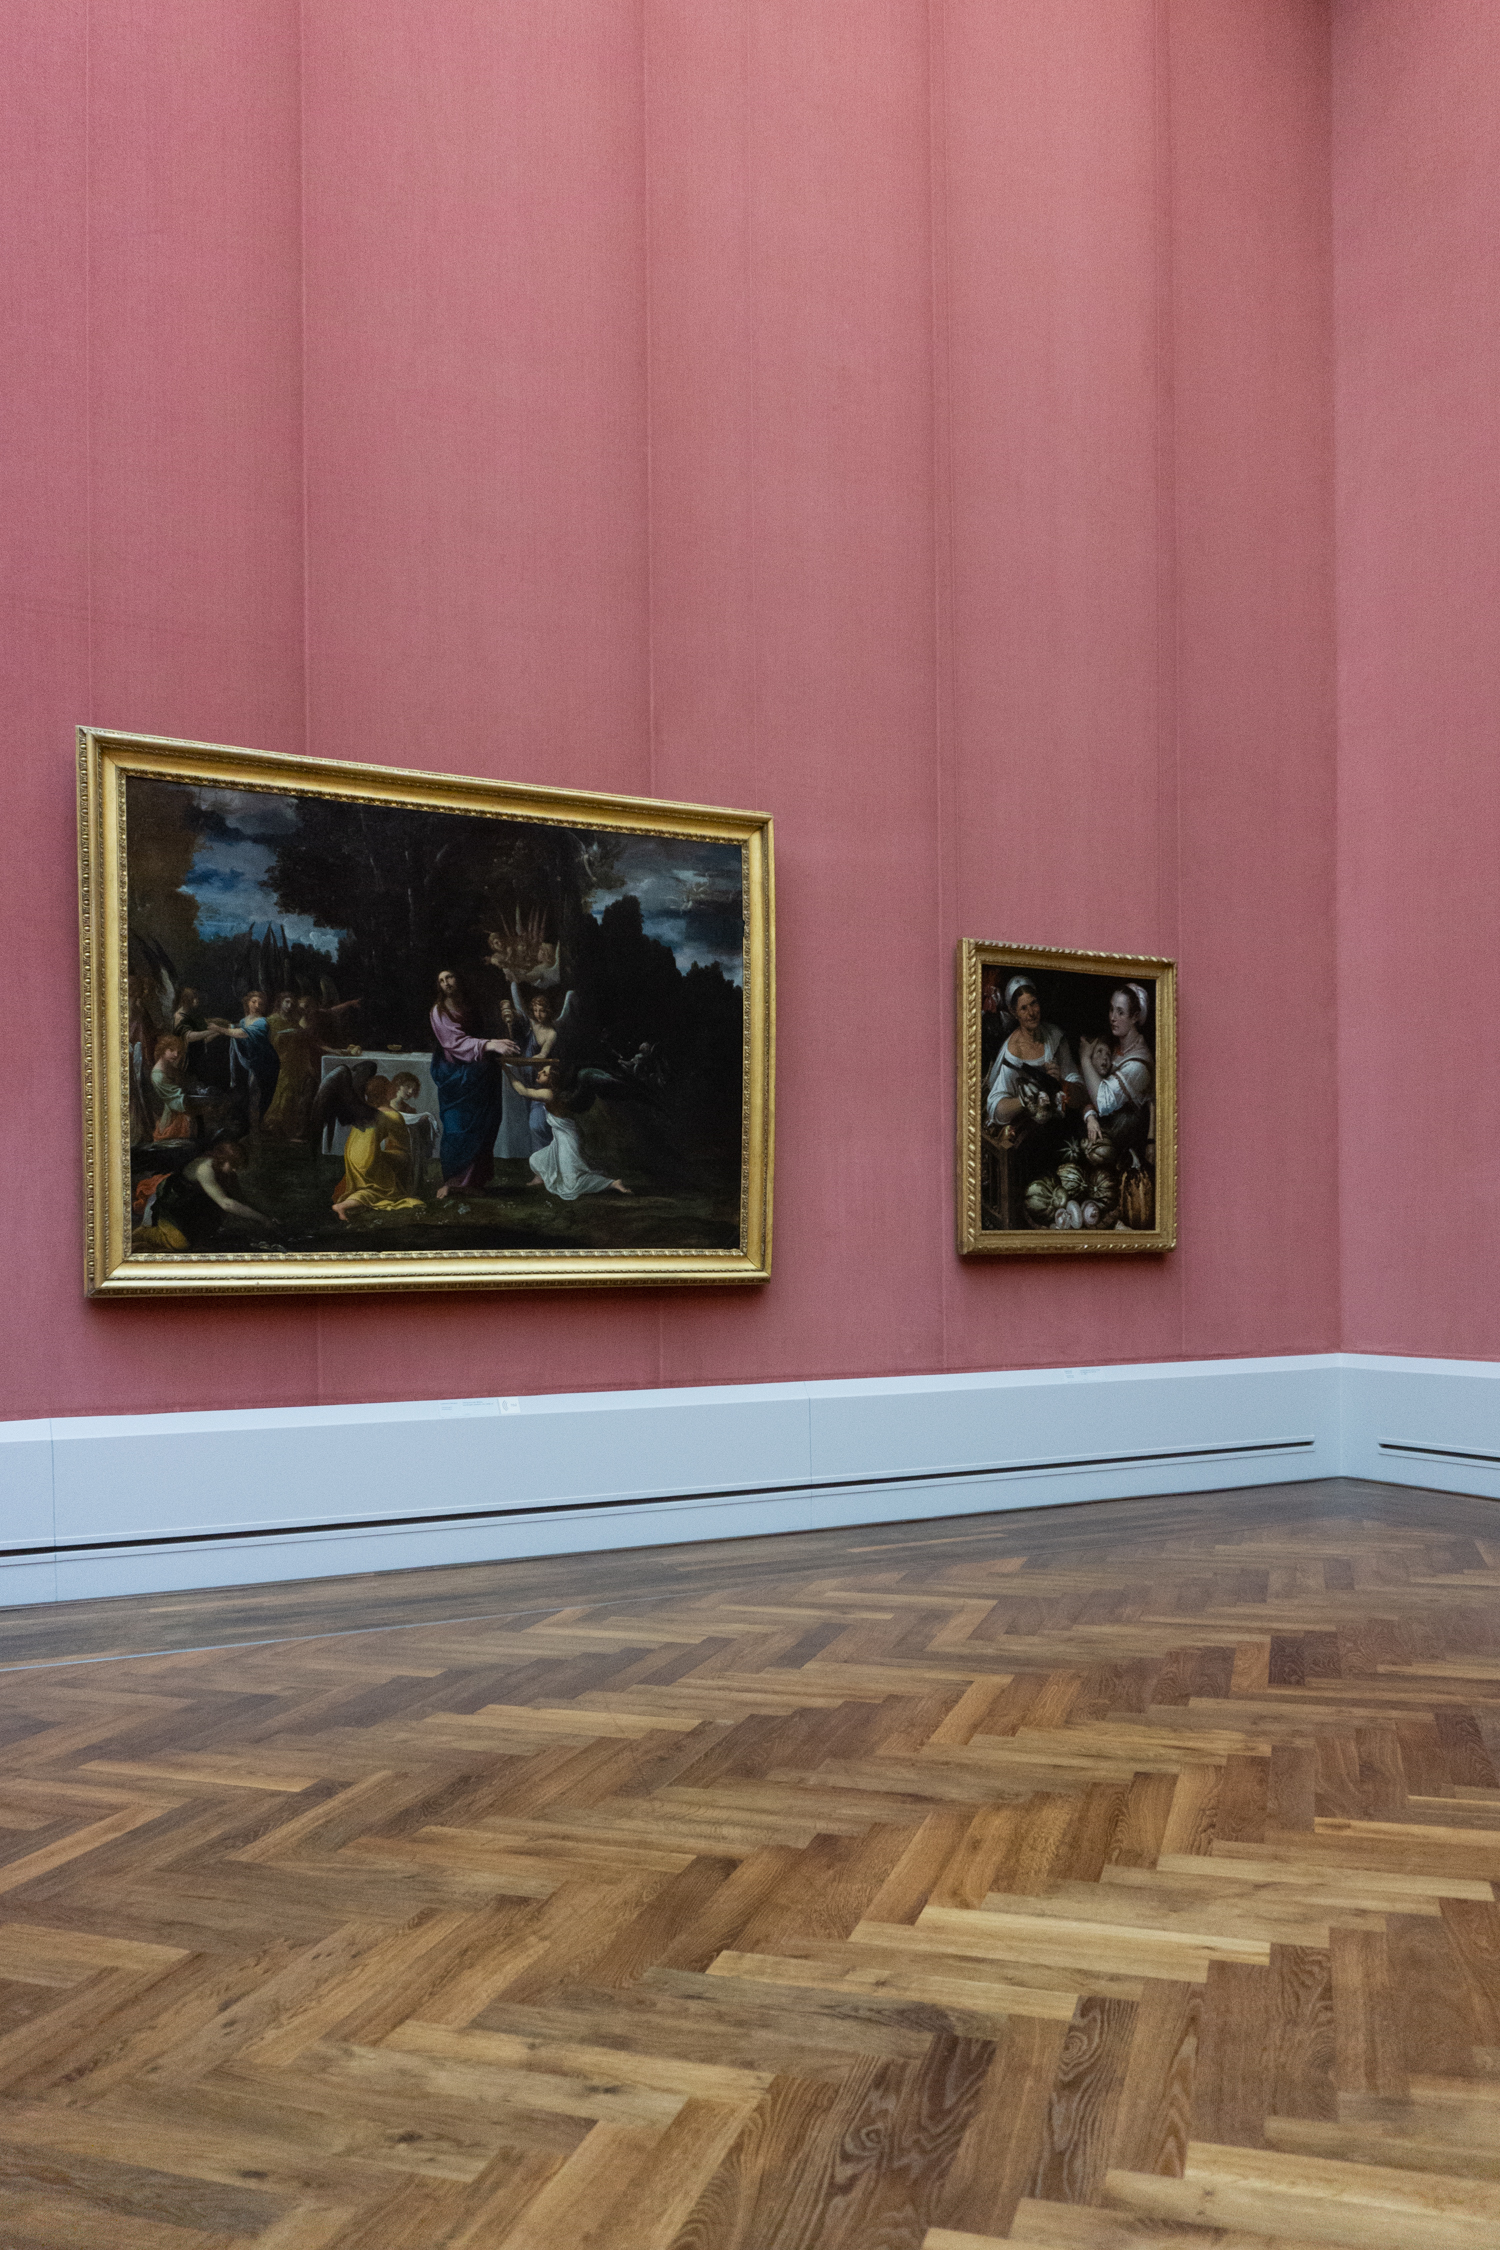 Berlin Gemäldegalerie, Classic Art Museum - Soothing Interior with Historic Paintings | RG Daily Blog, City Travel Guide